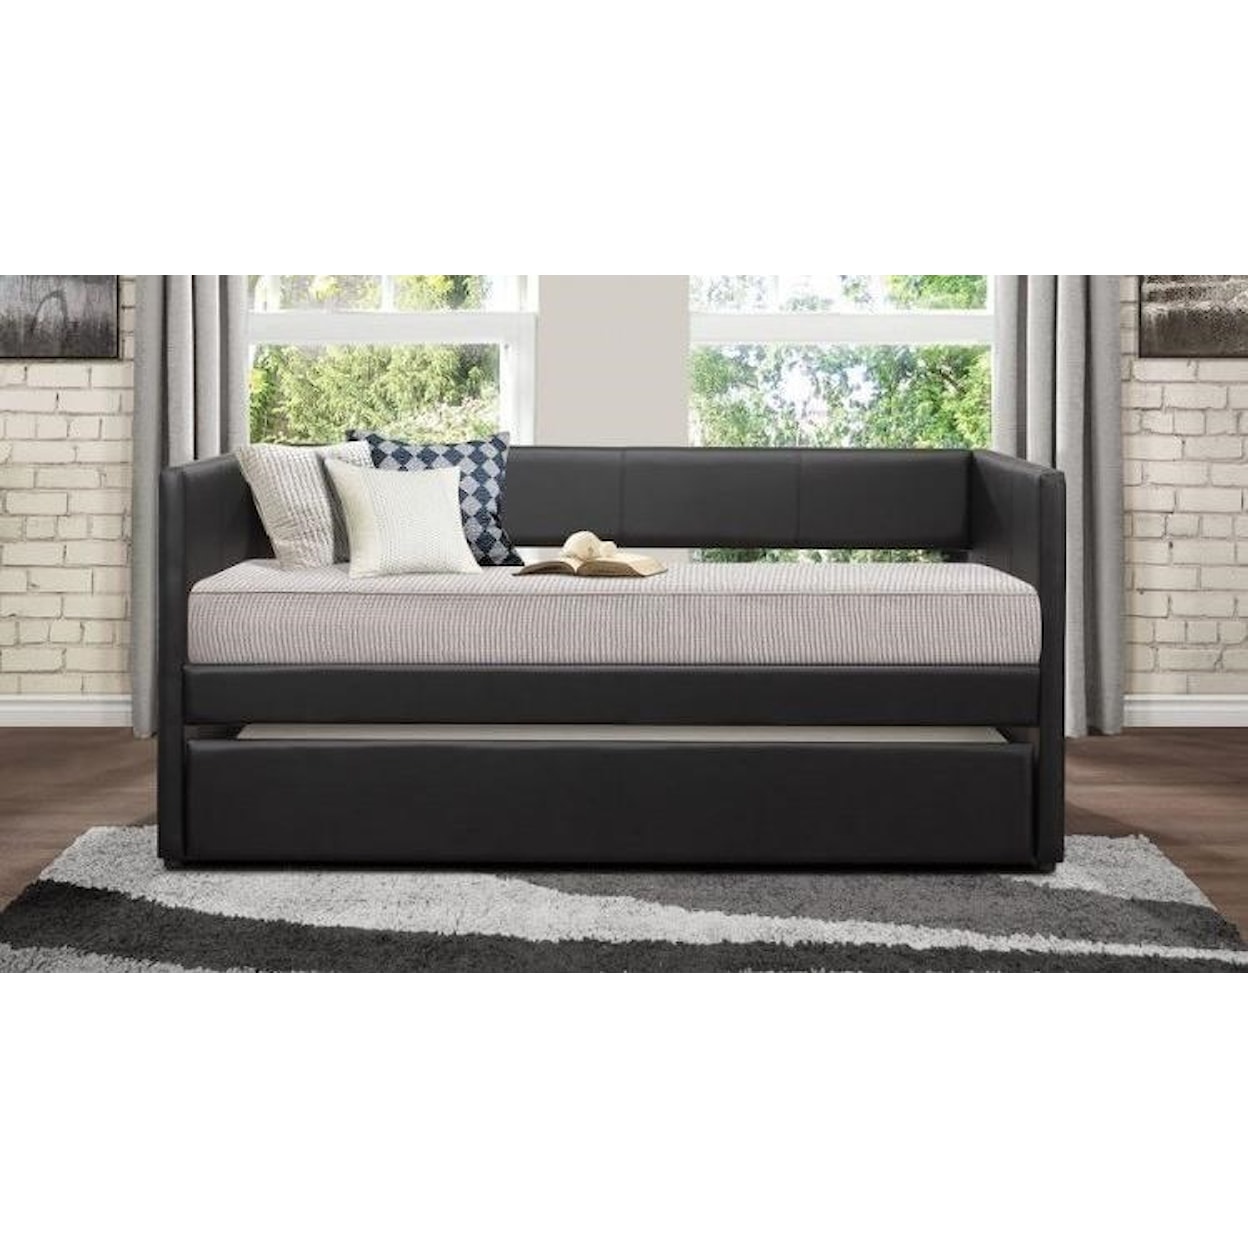 Homelegance Daybeds Adra Daybed w/ Trundle